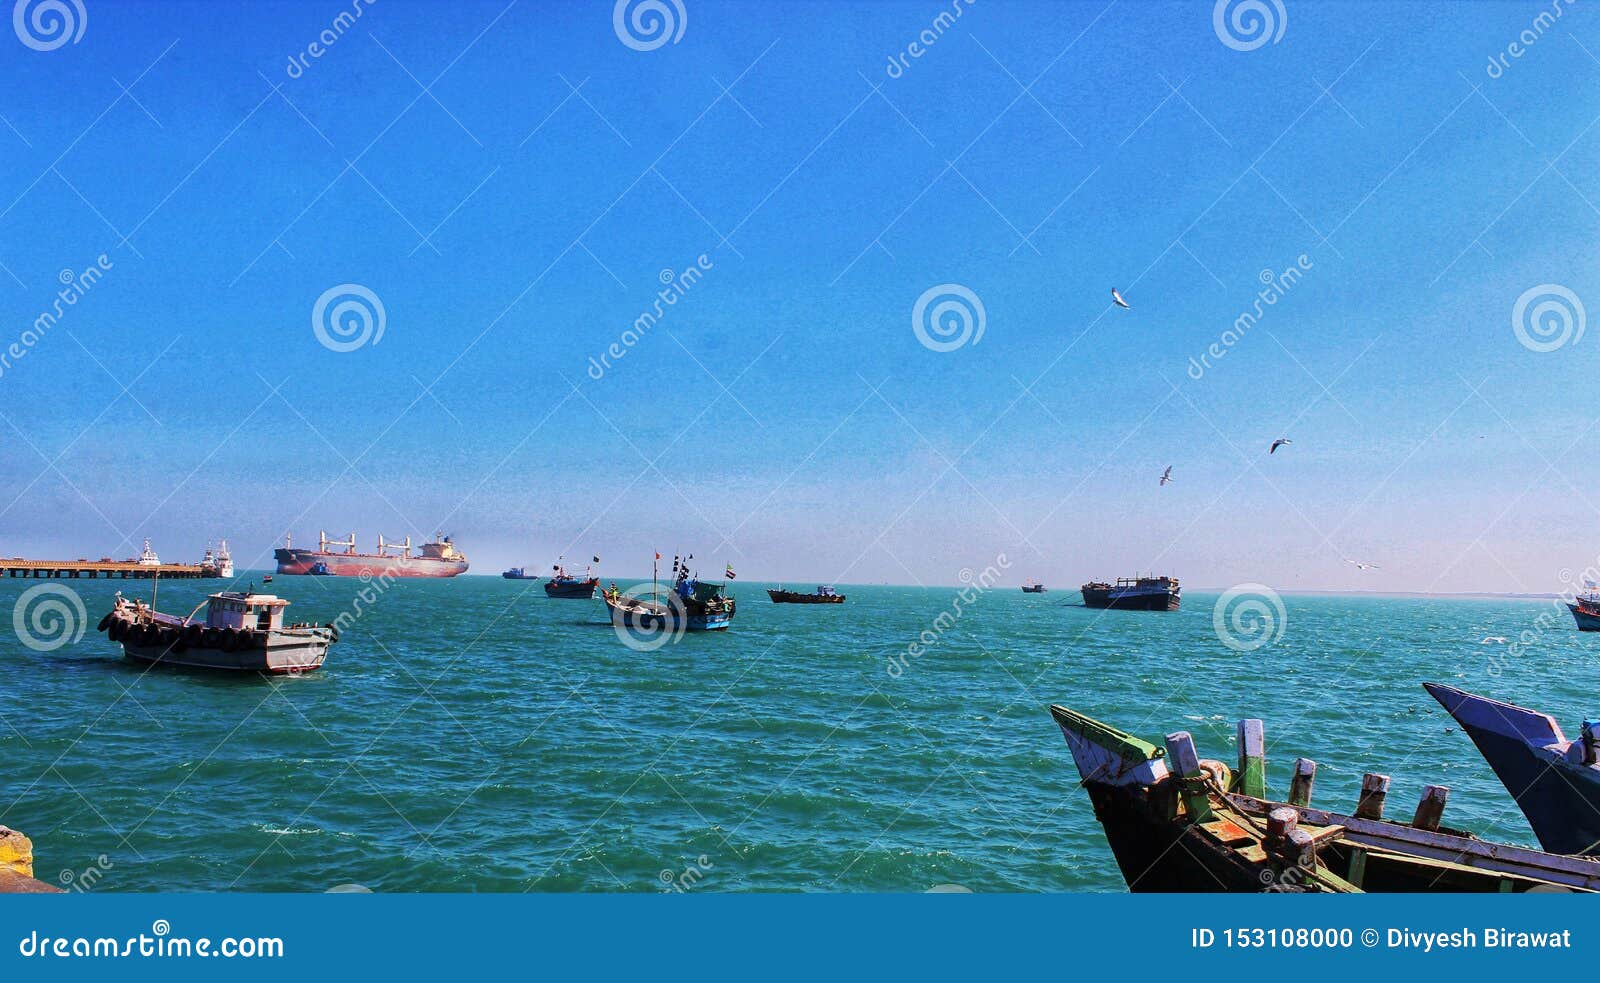 Ships Sailing In The Blue Ocean Stock Photo Image of